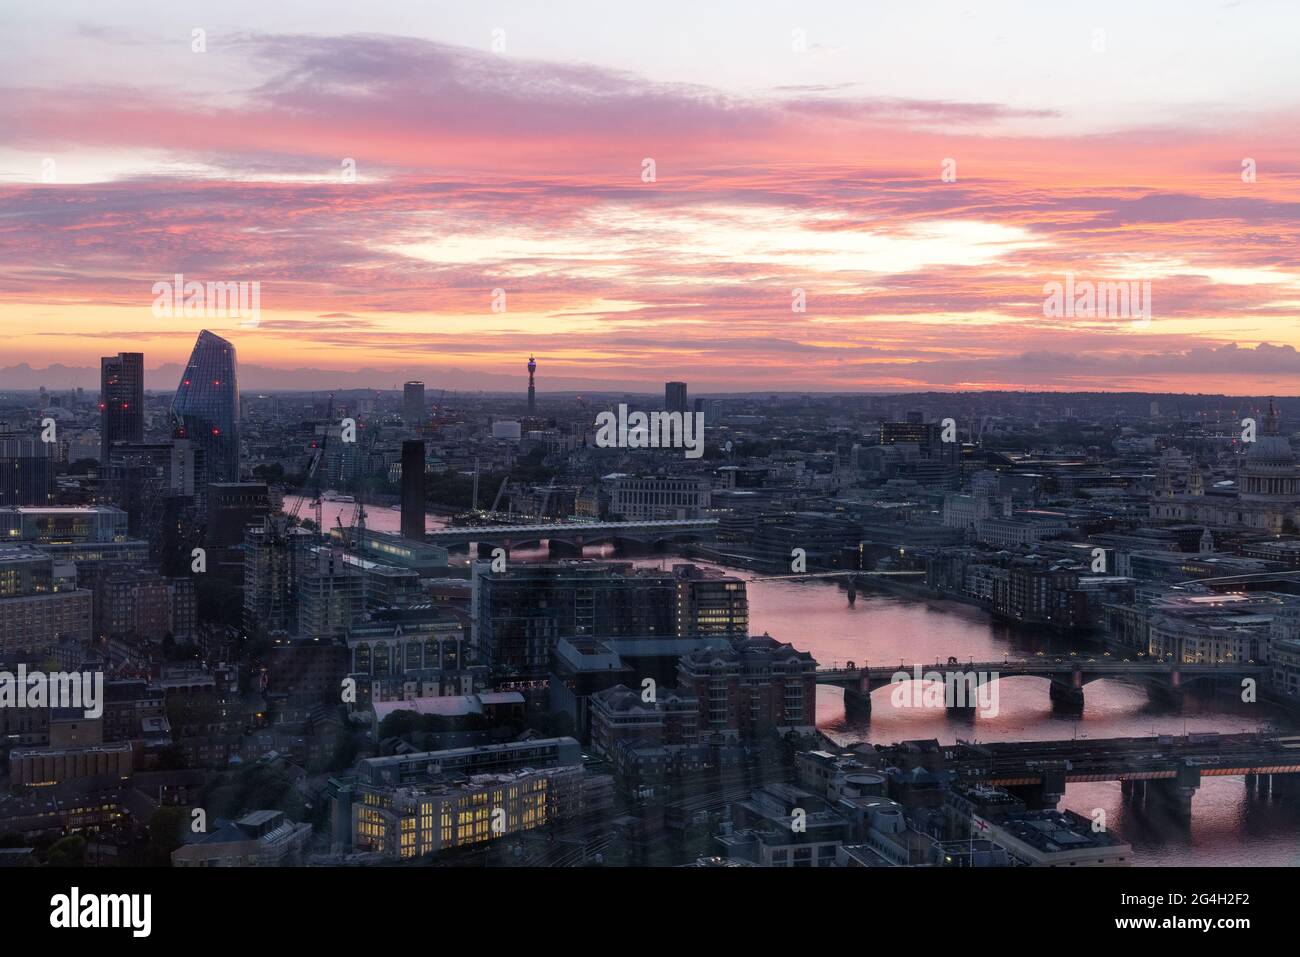 London skyline at sunset,- london cityscape  looking west over the river thames from the Shard; London UK Stock Photo